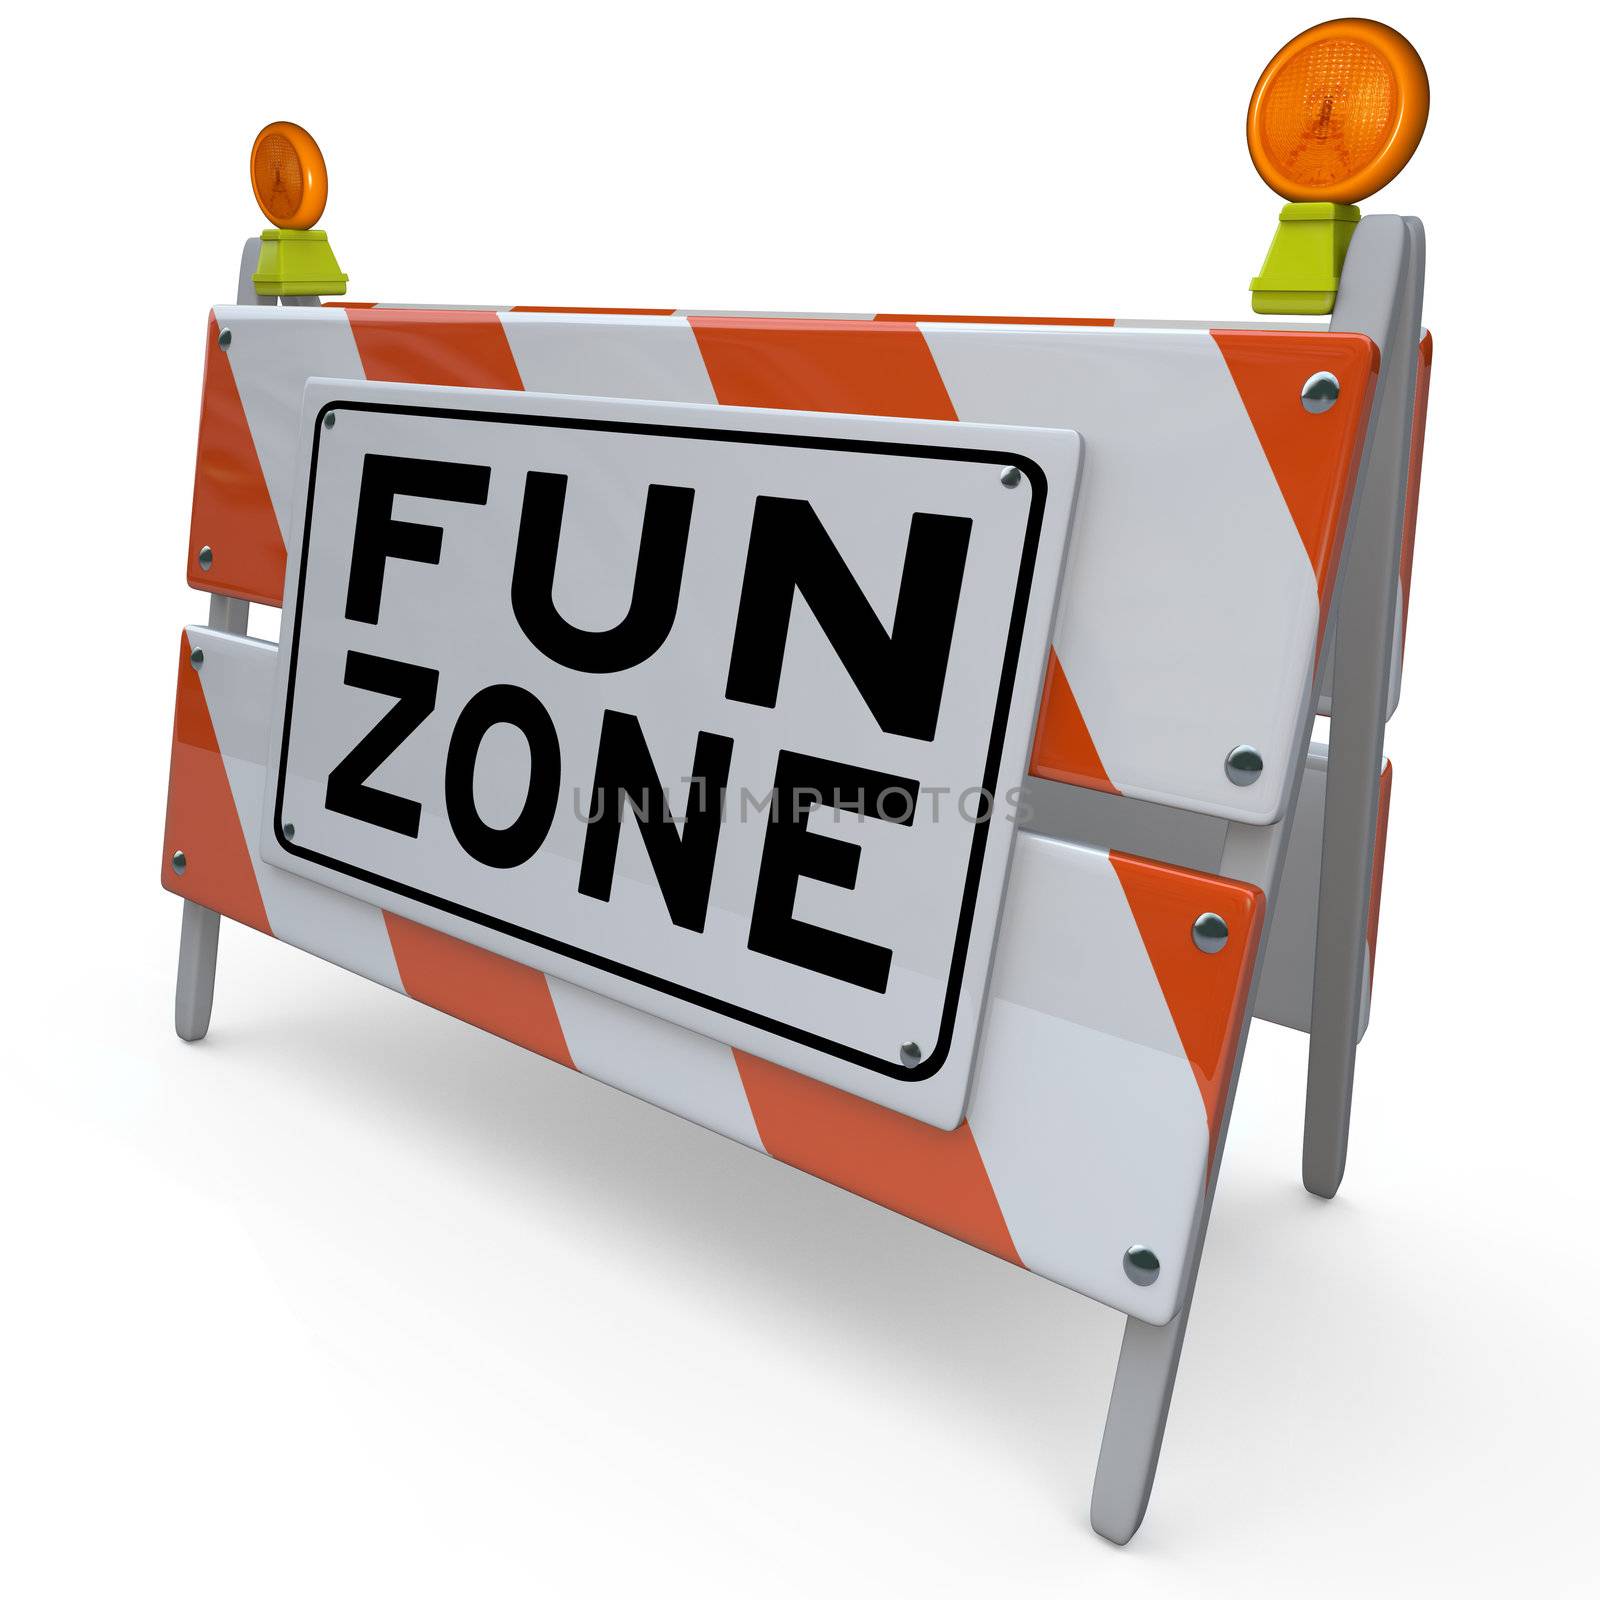 Fun Zone Barricade Construction Sign Kids Playground by iQoncept